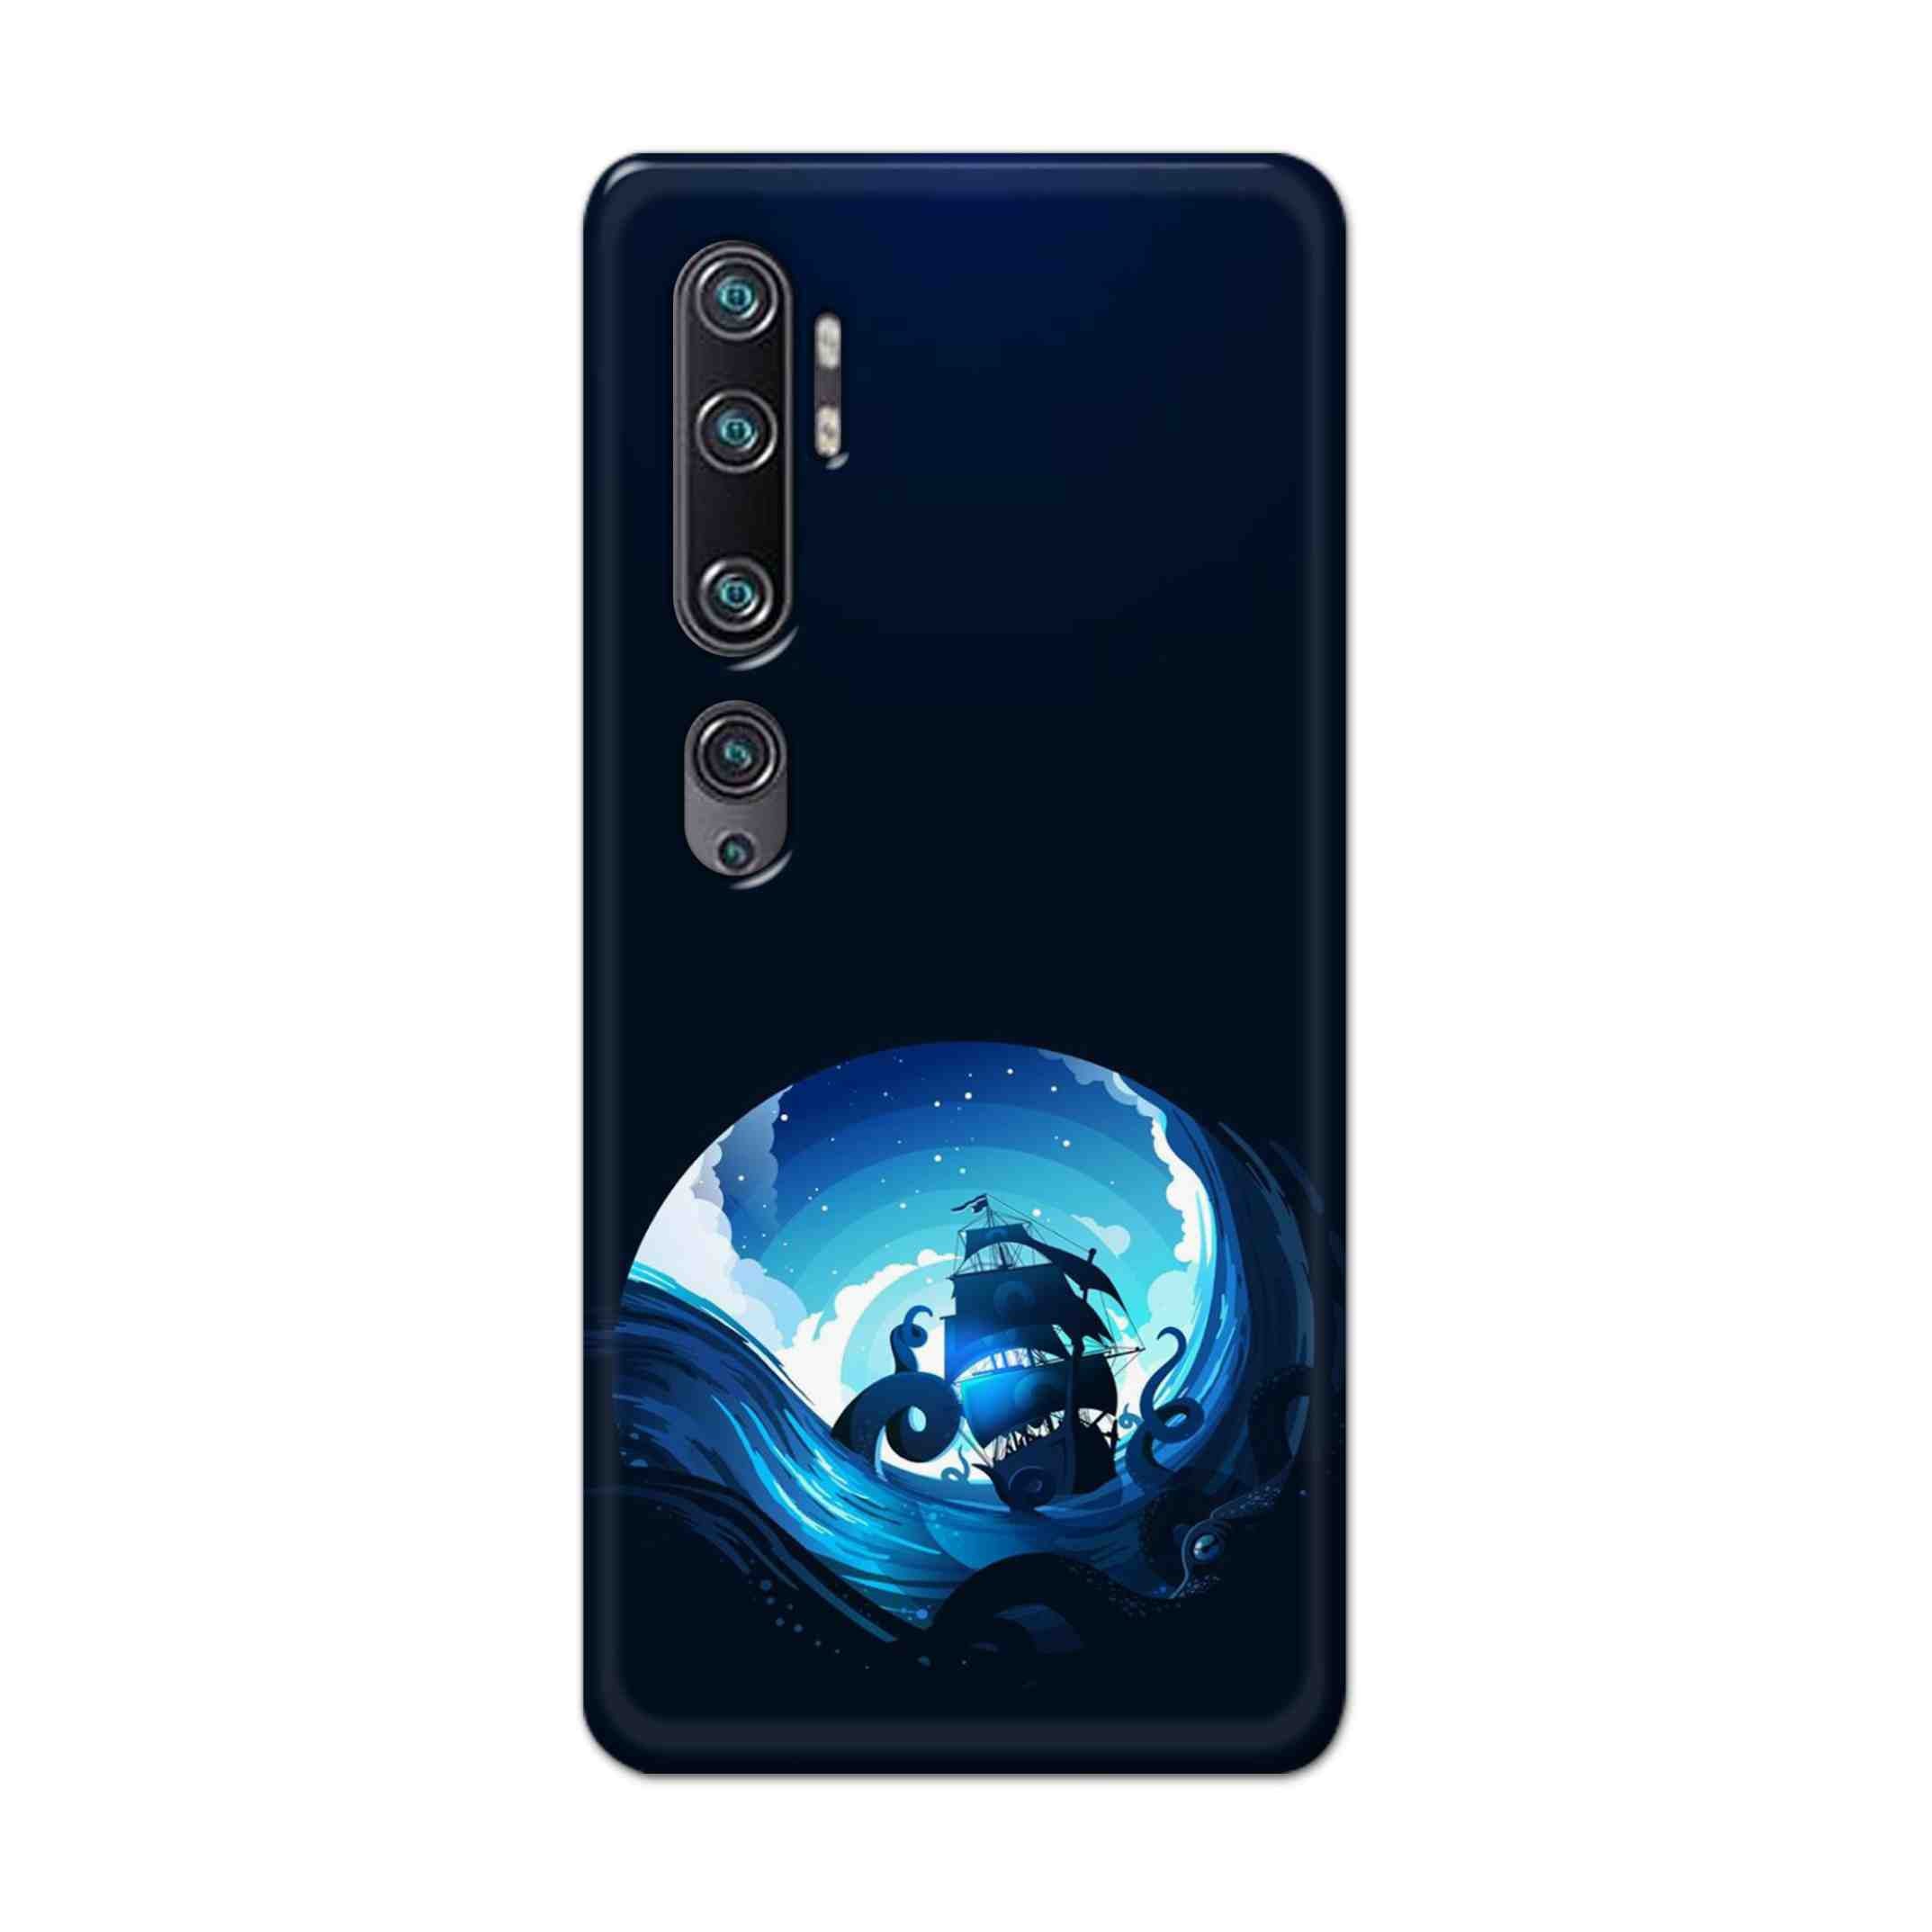 Buy Blue Sea Ship Hard Back Mobile Phone Case Cover For Xiaomi Mi Note 10 Online